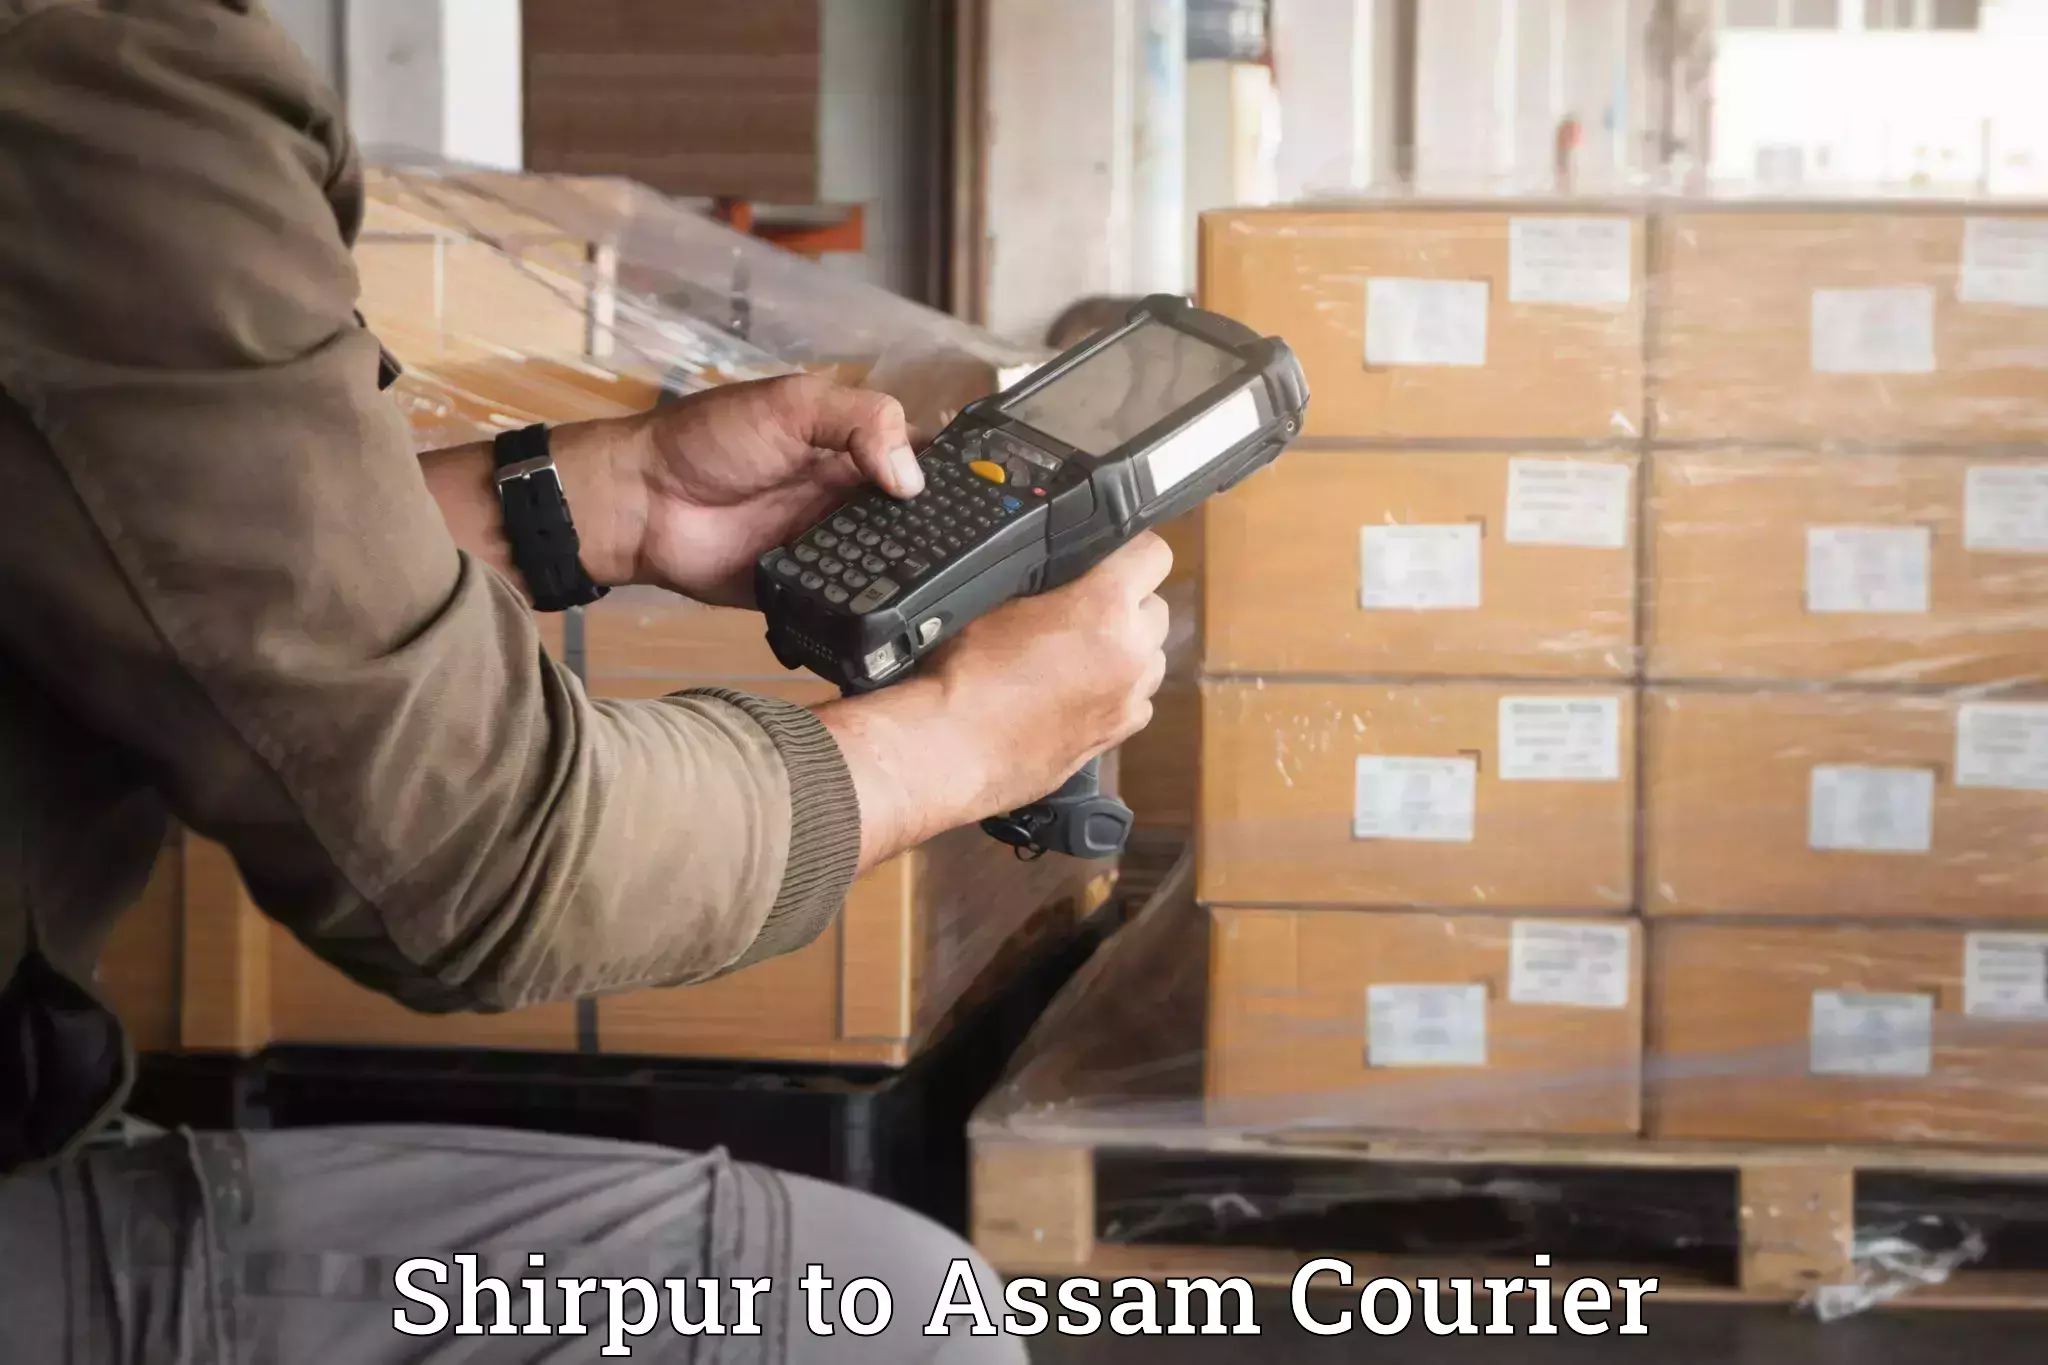 Emergency baggage service Shirpur to Assam